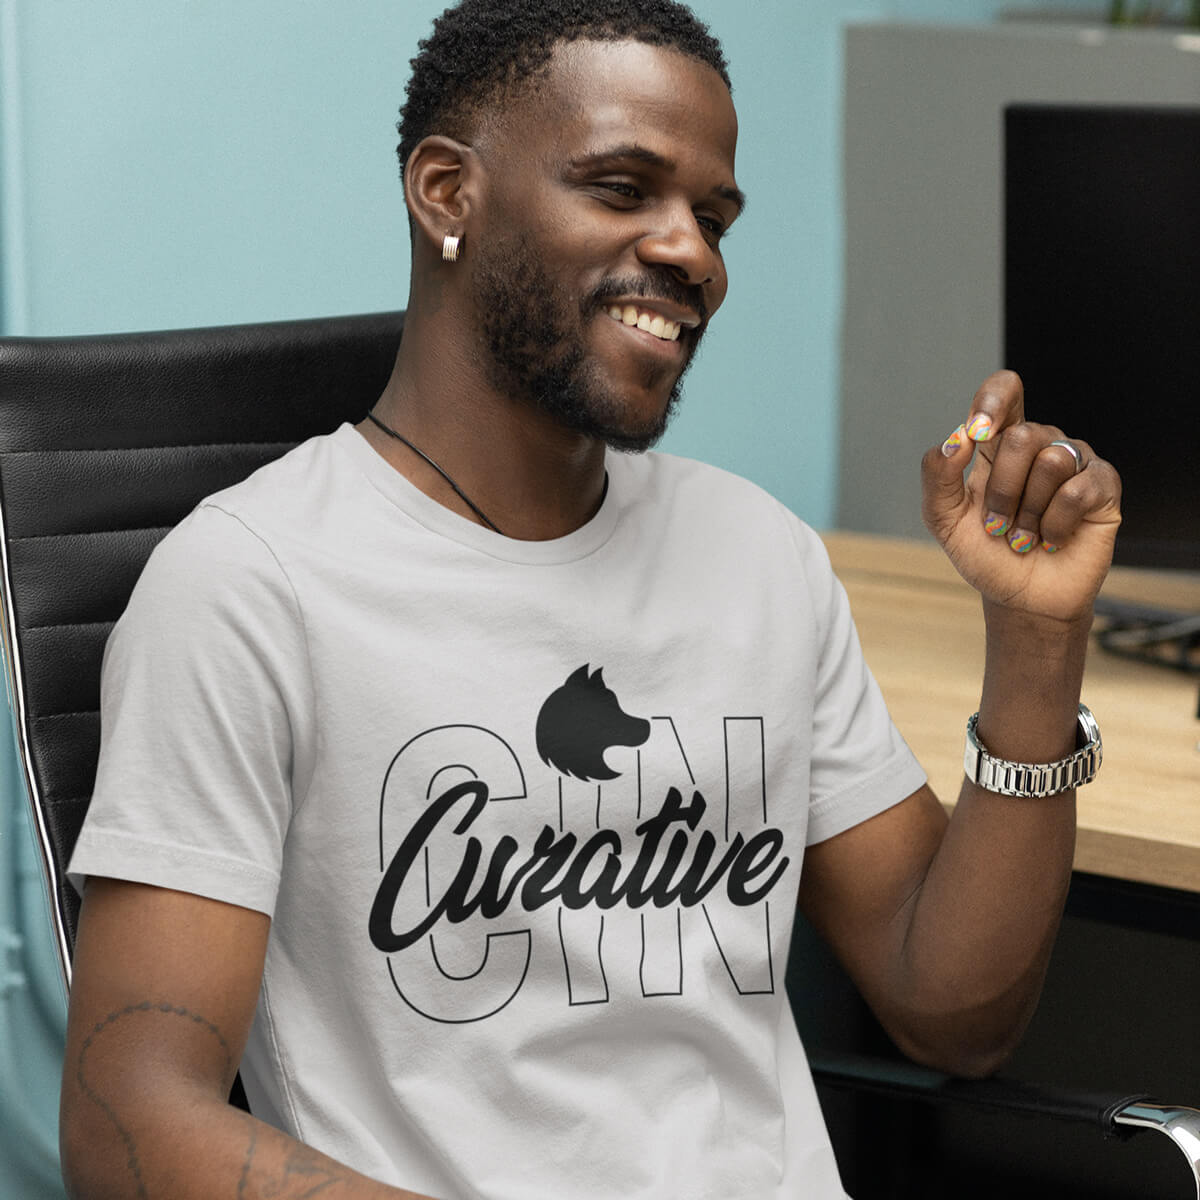 Man sits in desk chair wearing a white short sleeve t-shirt tee with black curative printing logo imprint